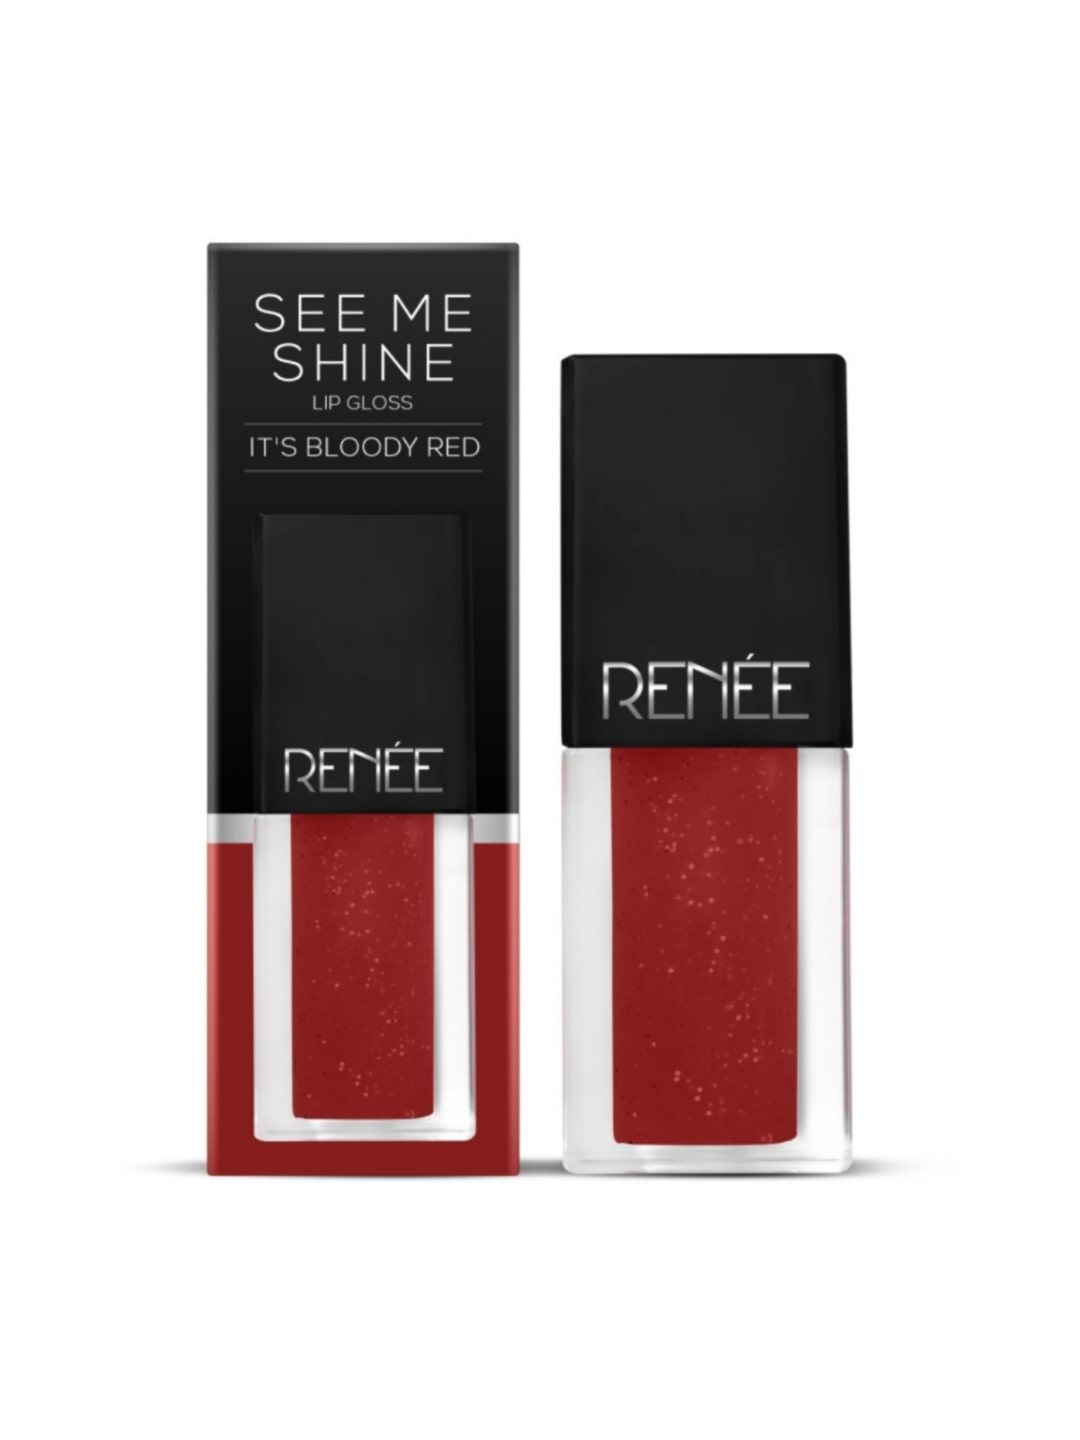 Renee See Me Shine Lip Gloss - Its Bloody Red 2.5ml Price in India